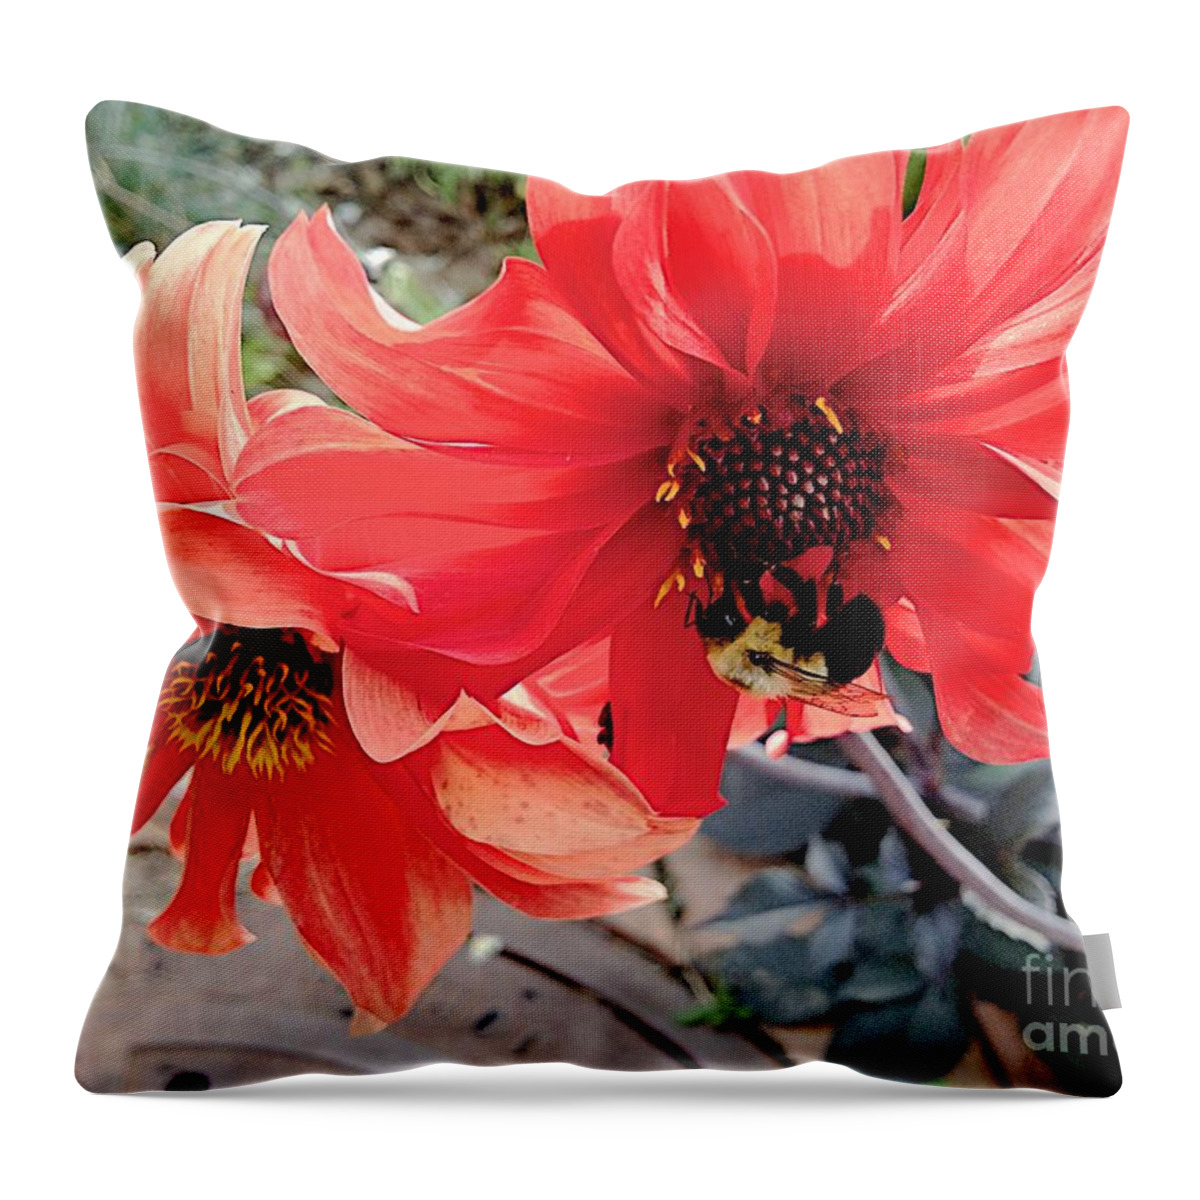 Bumble Bee Throw Pillow featuring the photograph Introvert by Joseph Yarbrough